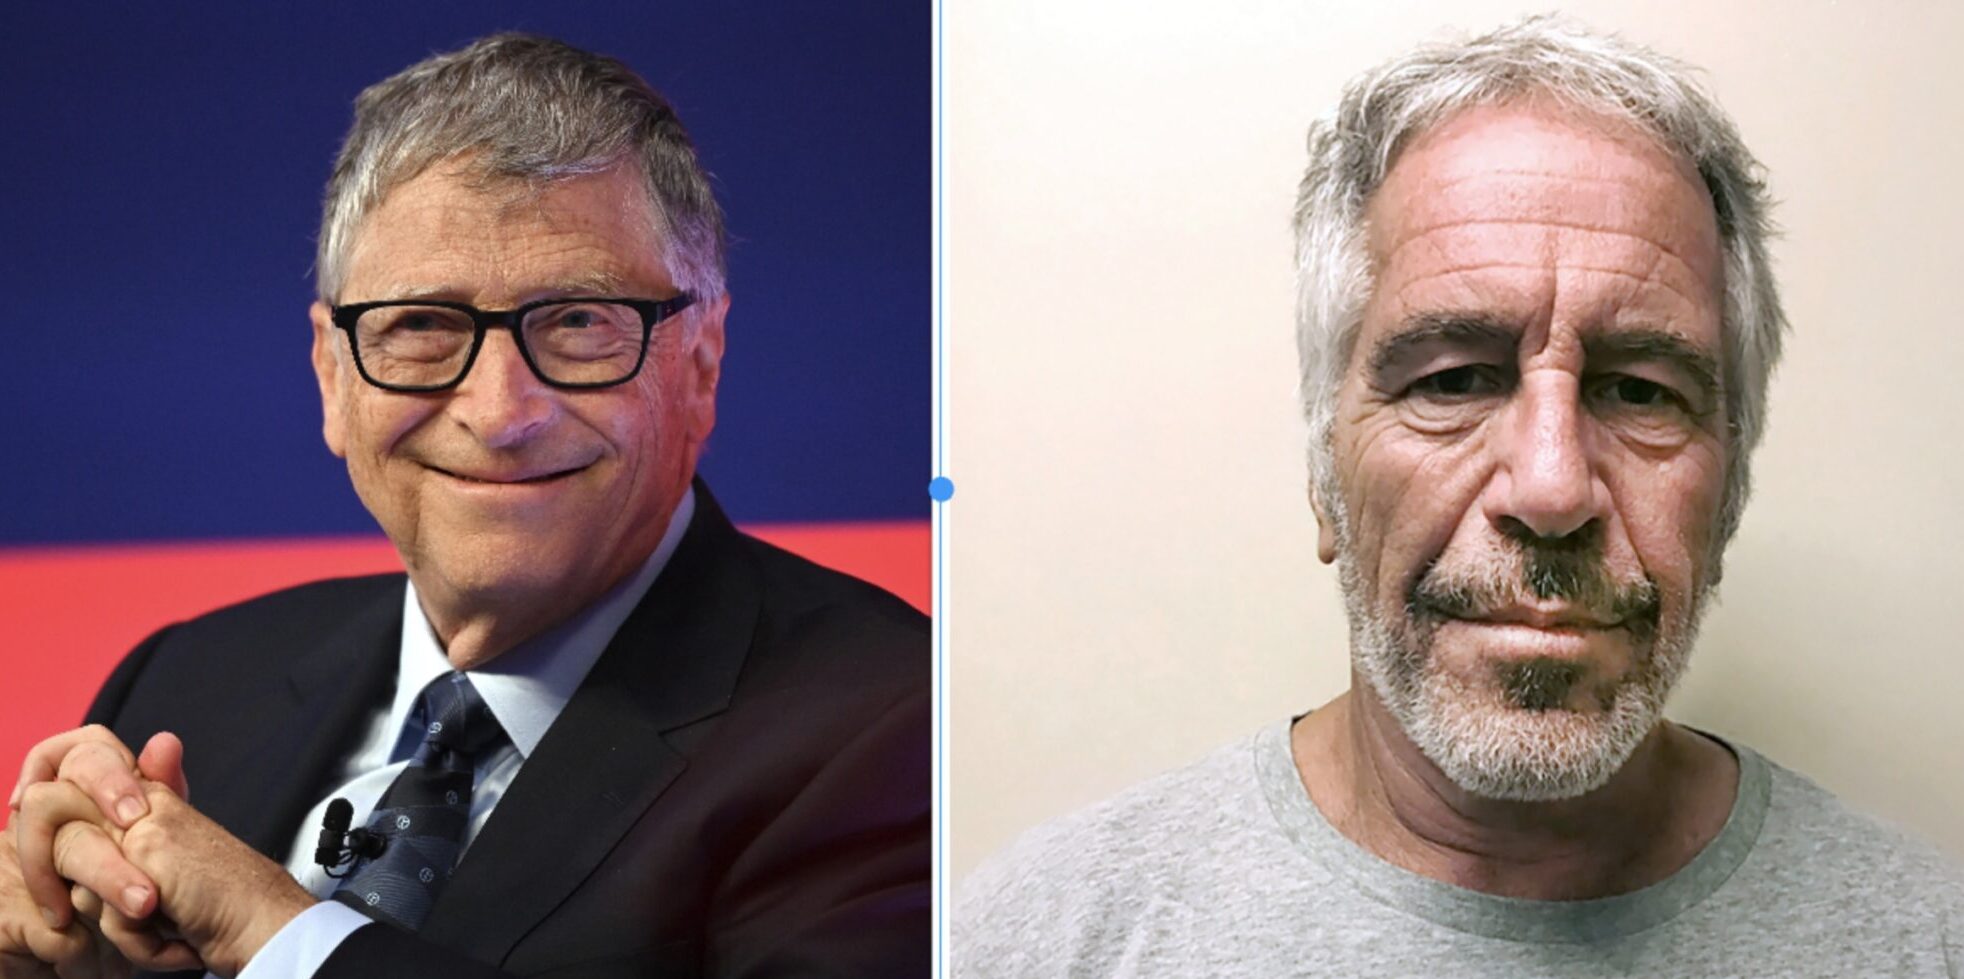 Wild New Report Reveals Jeffrey Epstein Found Out Bill Gates Was Having an Affair and Then Appeared to Try to Blackmail Him